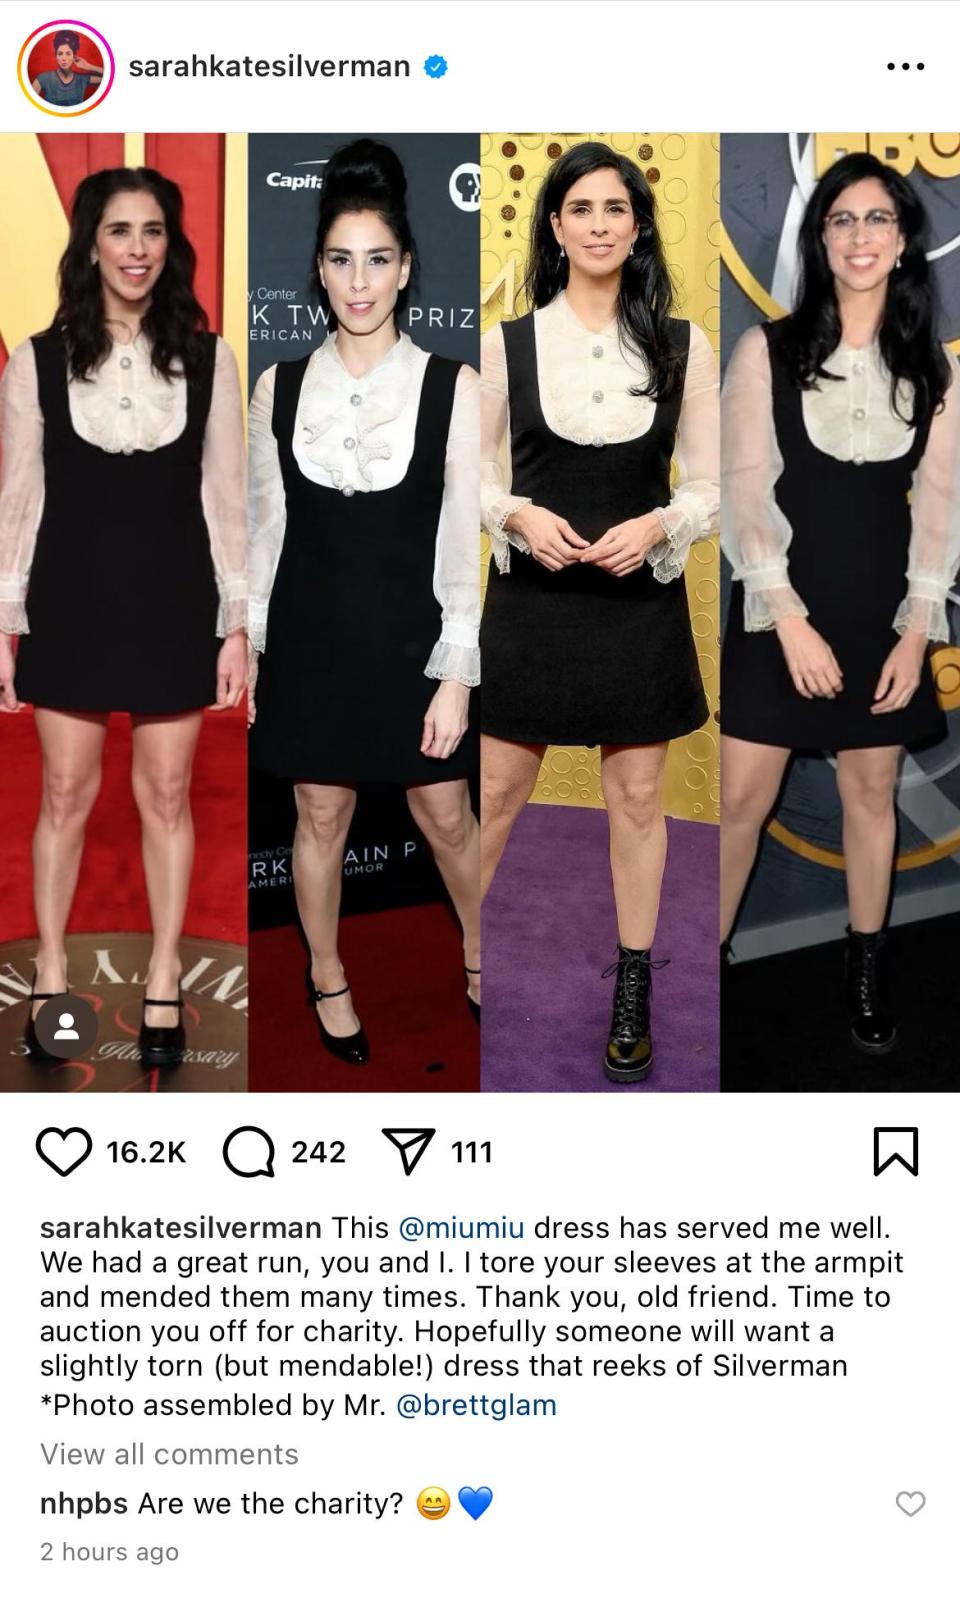 Actress, comedian and writer Sarah Silverman, known for her role in Saturday Night Live, will be donating a $3,000 Miu Miu dress to NHPBS for its annual Spring Auction this June.